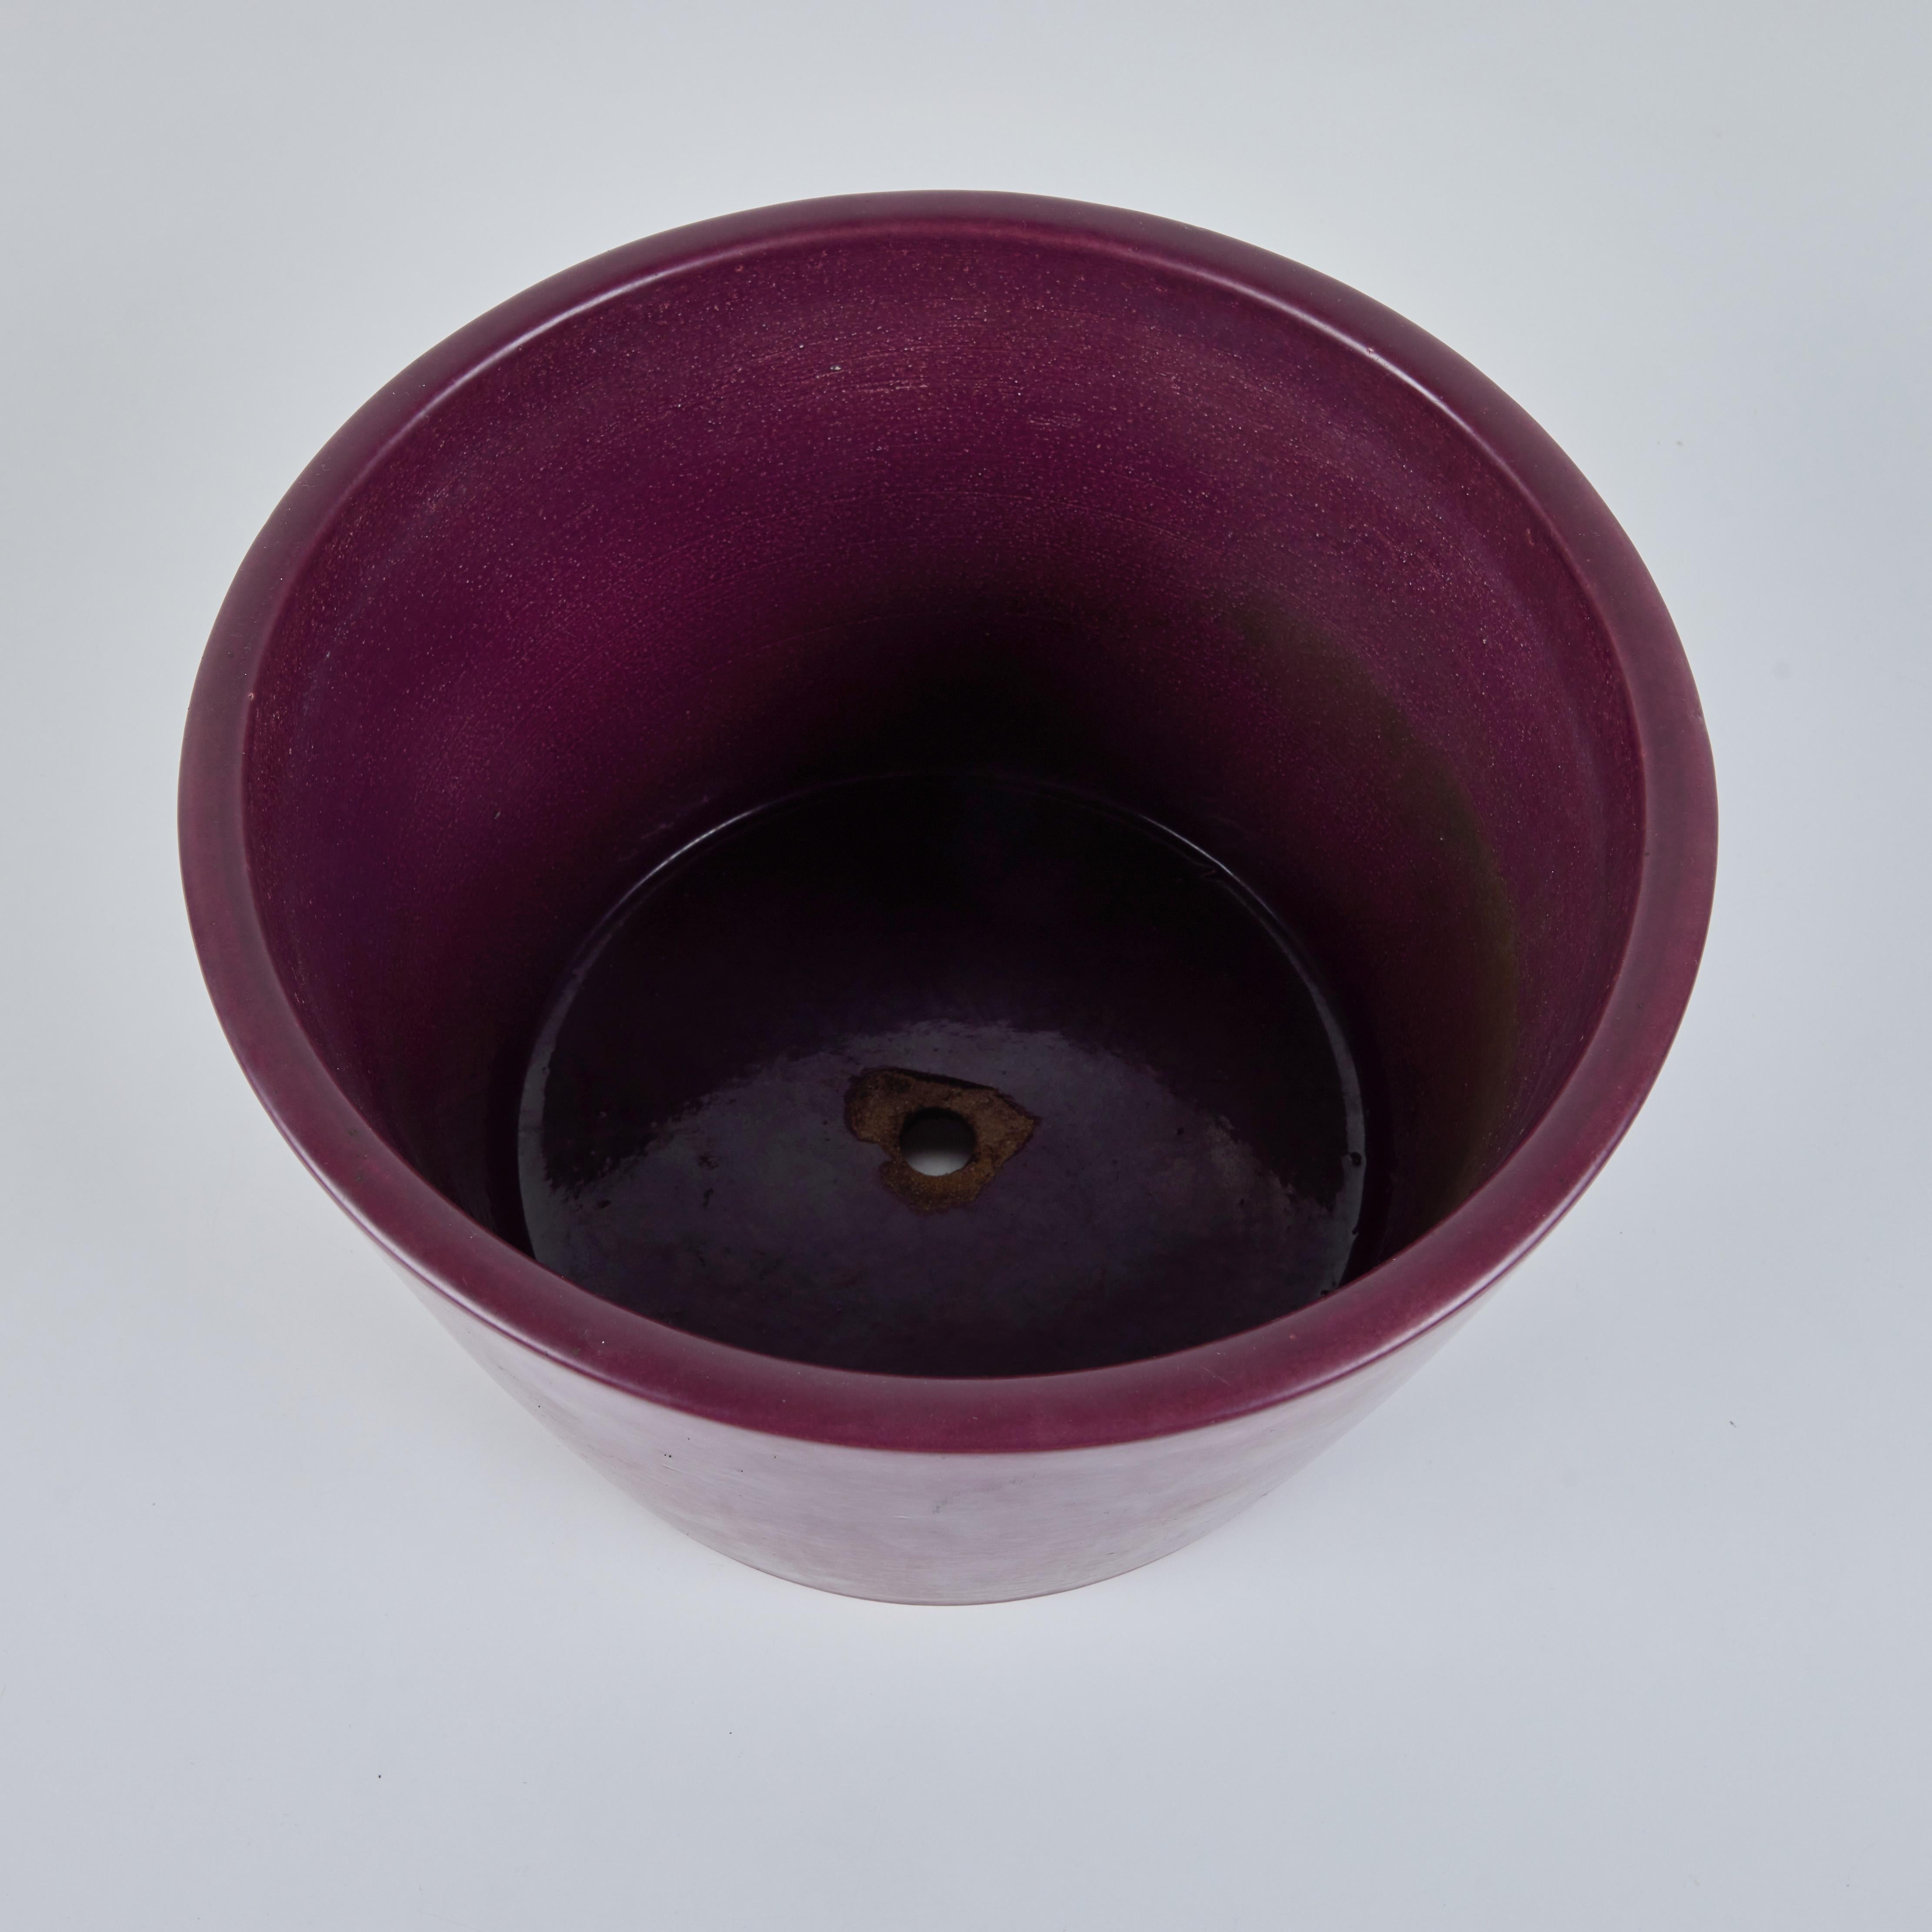 Glazed Malcolm Leland Purple Planter for Architectural Pottery For Sale